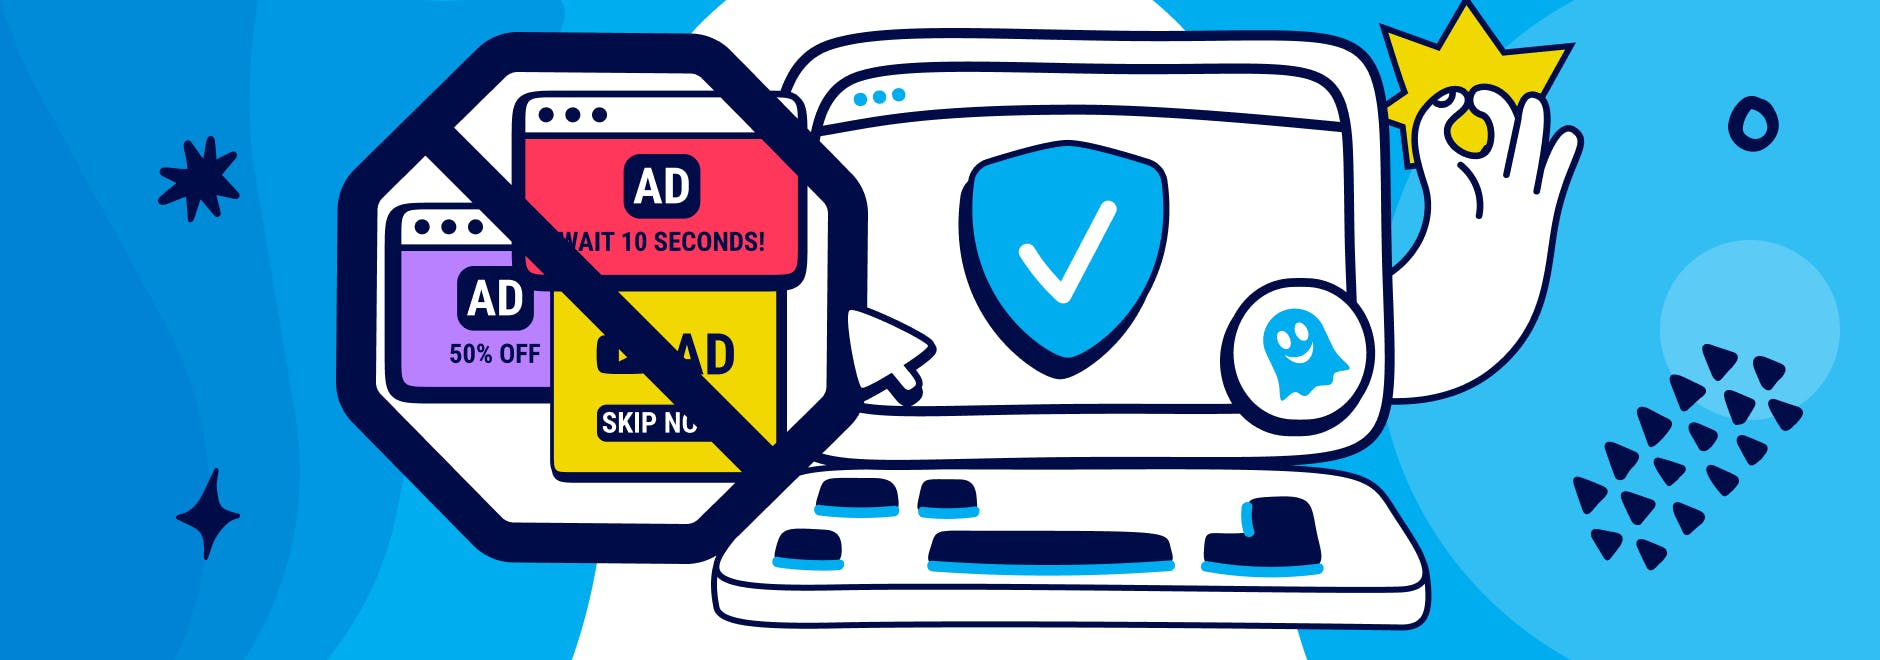 How to Stop Pop-Up Ads: Top Tips & Tricks